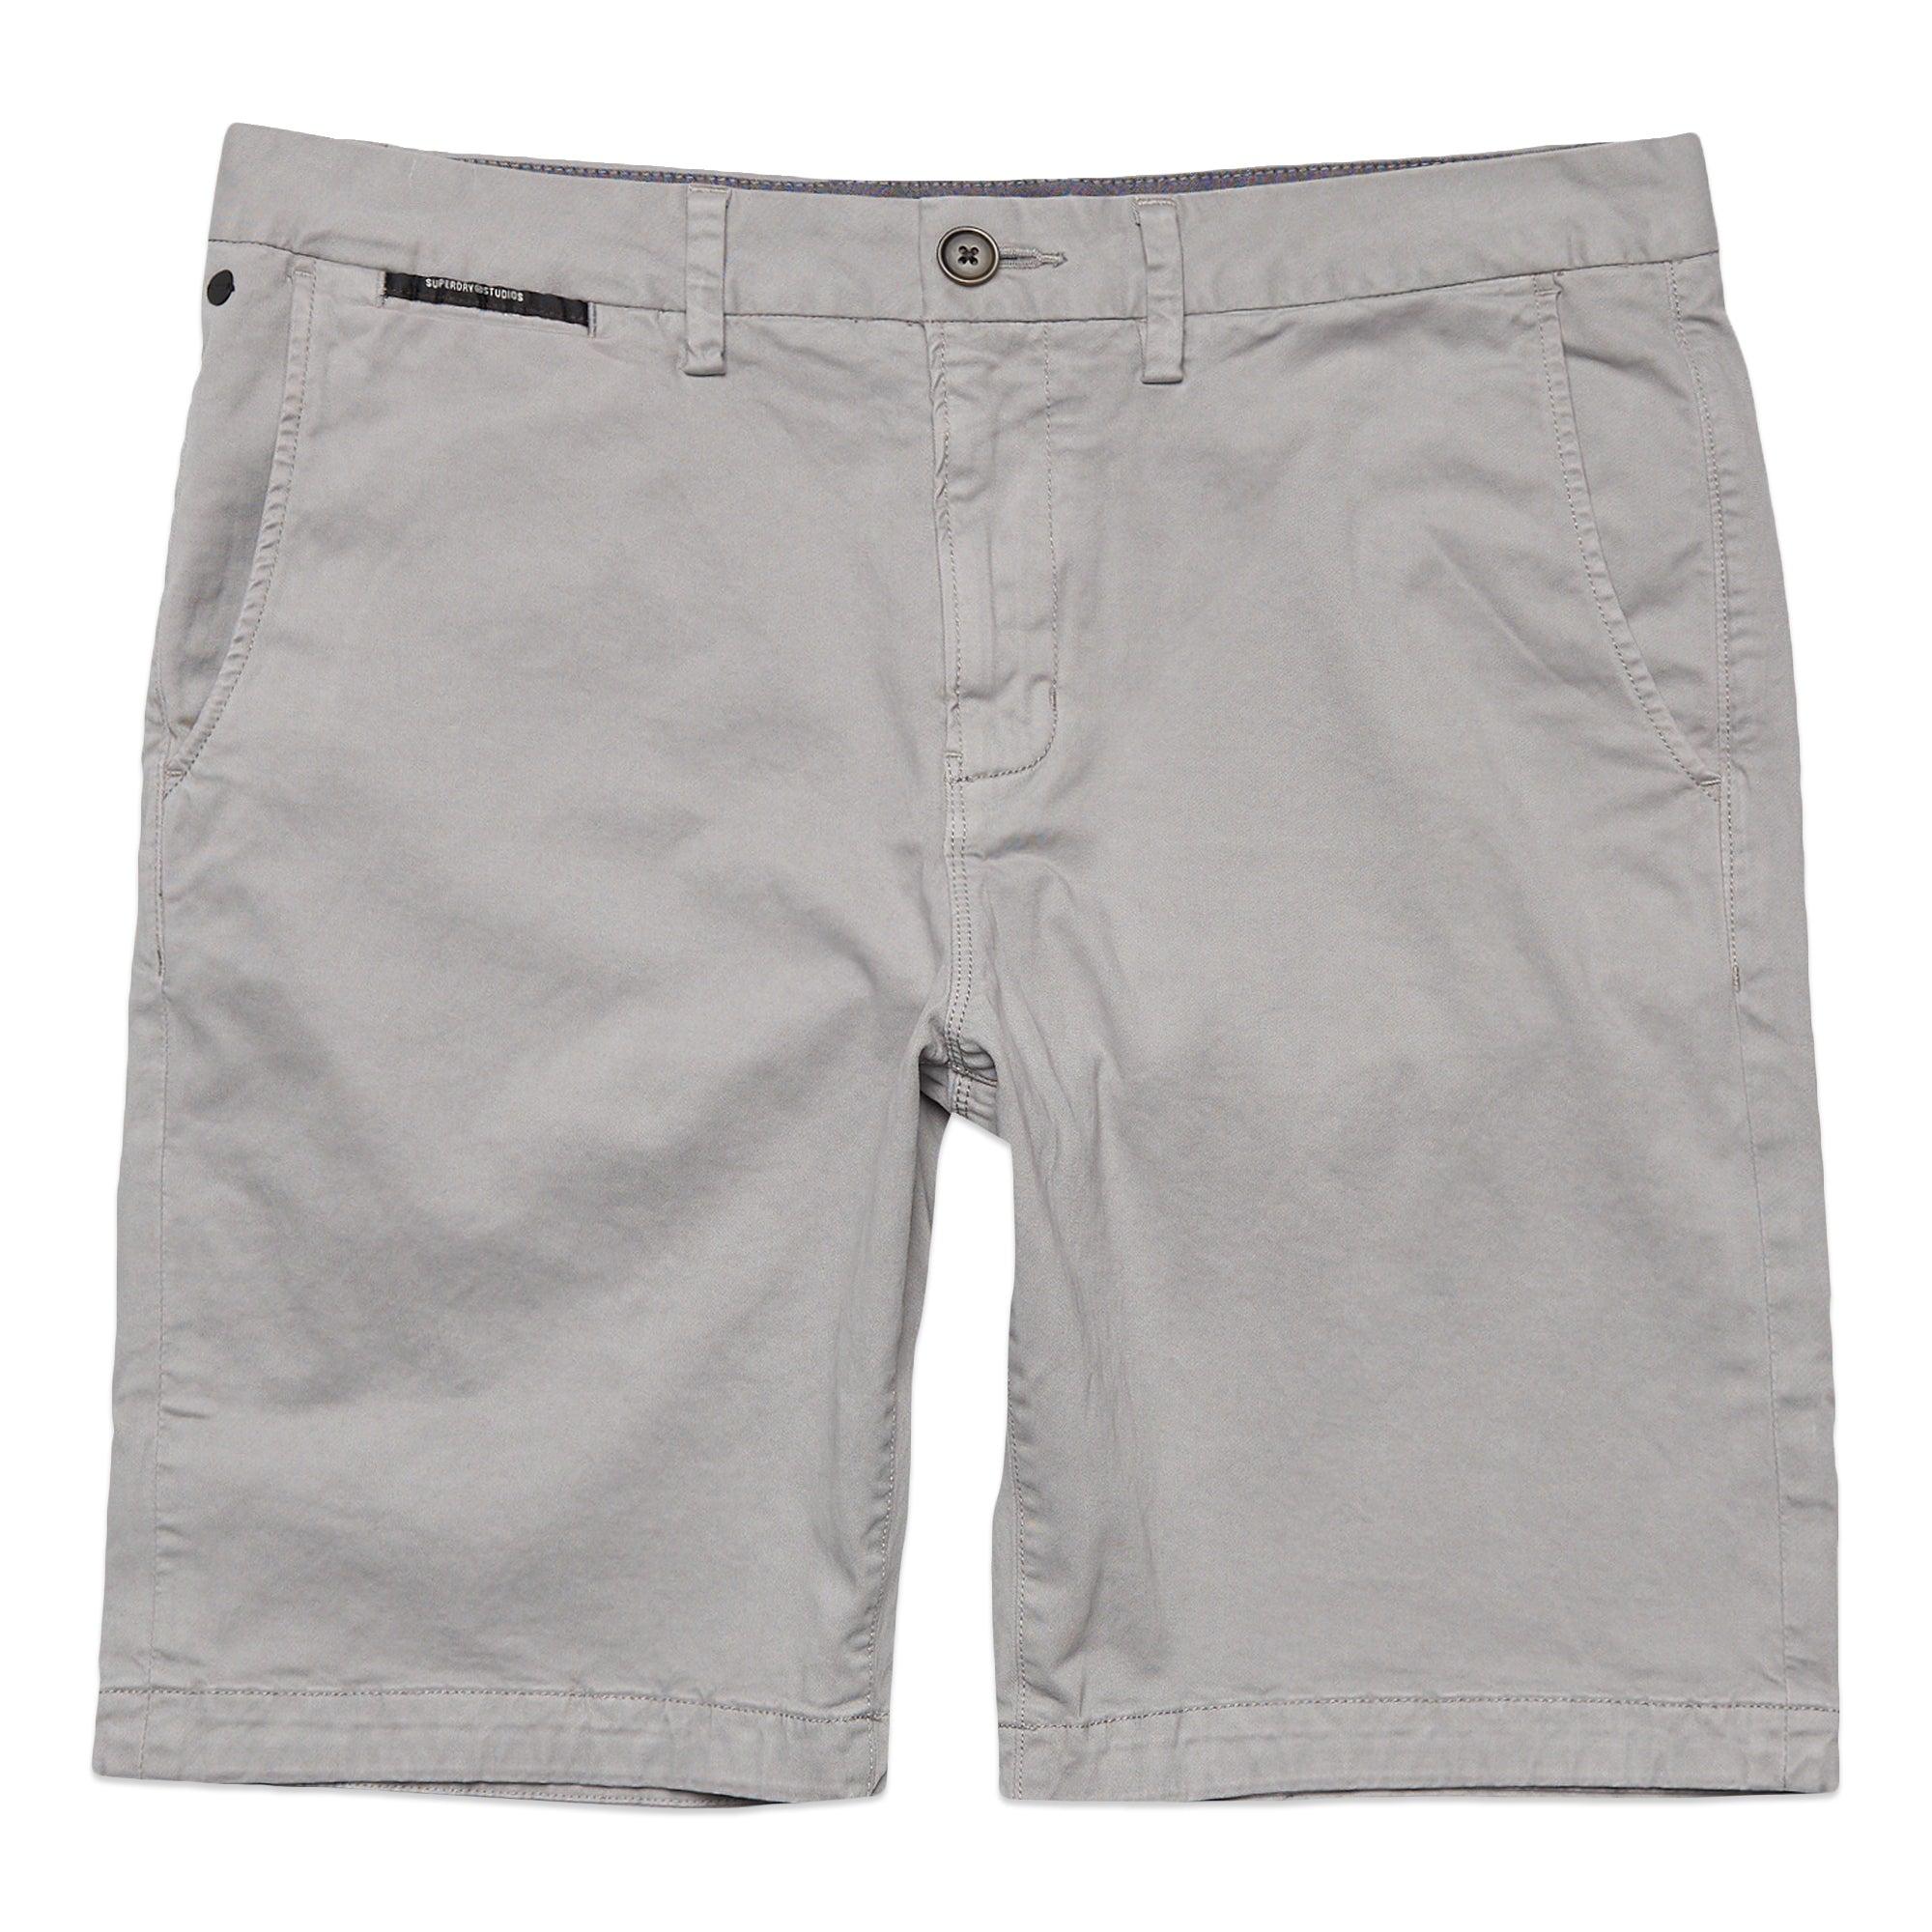 Superdry Cotton Studios Core Chino Short in Grey (Gray) for Men - Save 6% |  Lyst